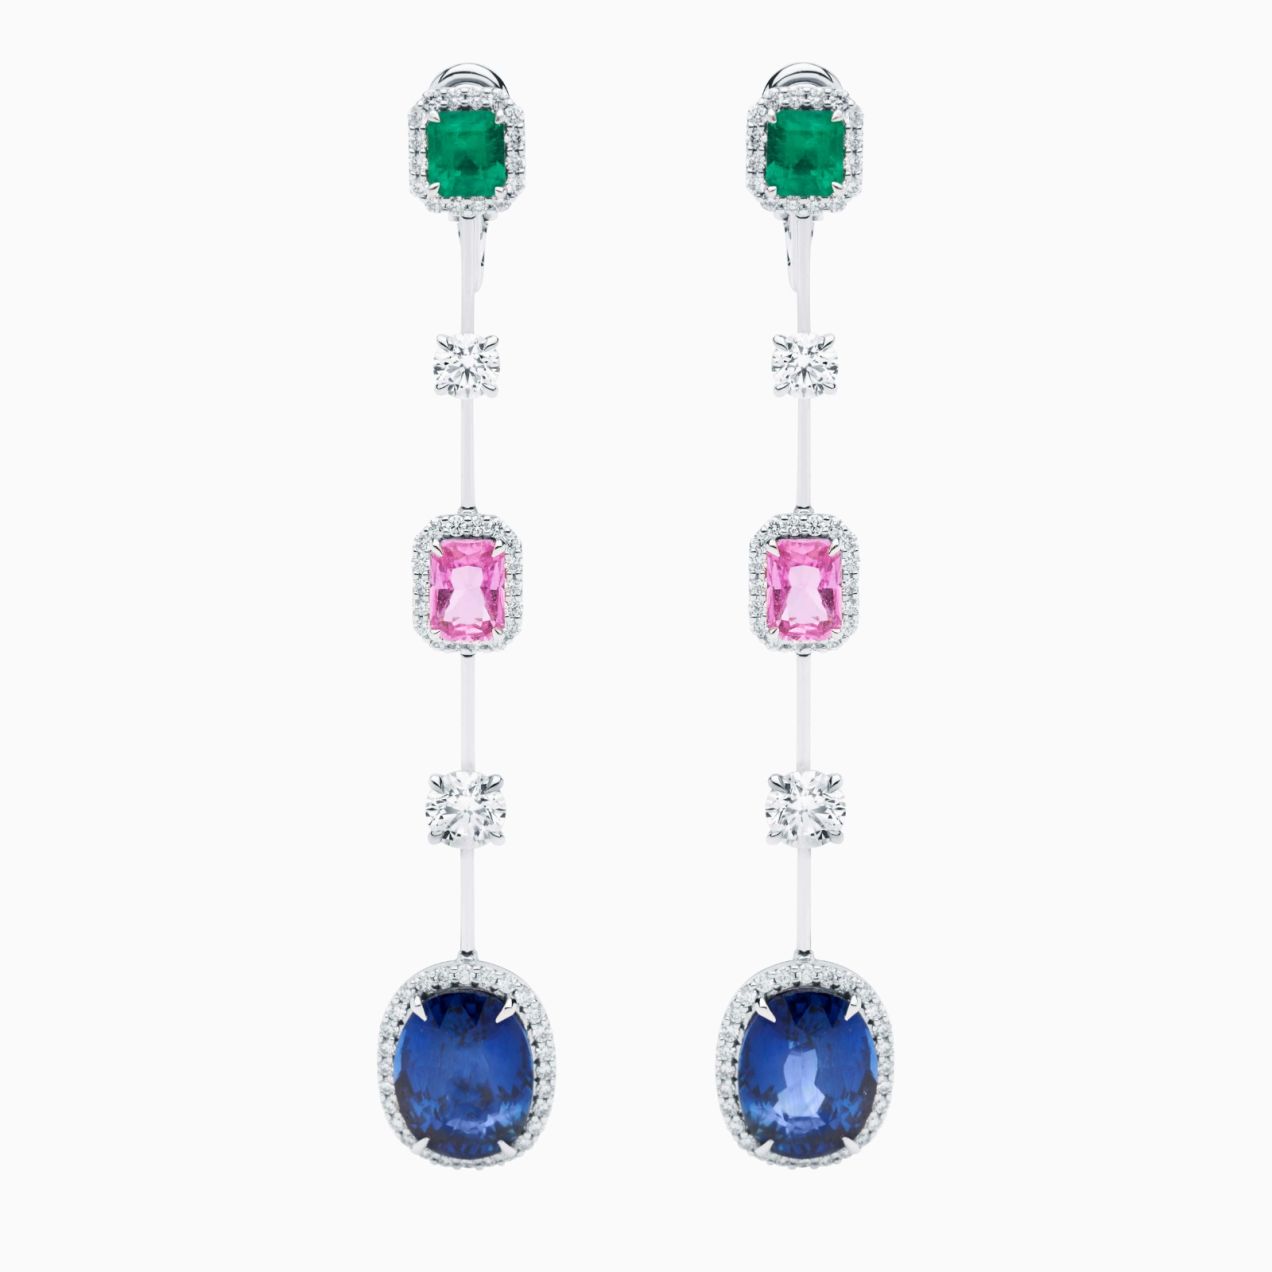 Emerald, sapphires and diamonds earrings in white gold